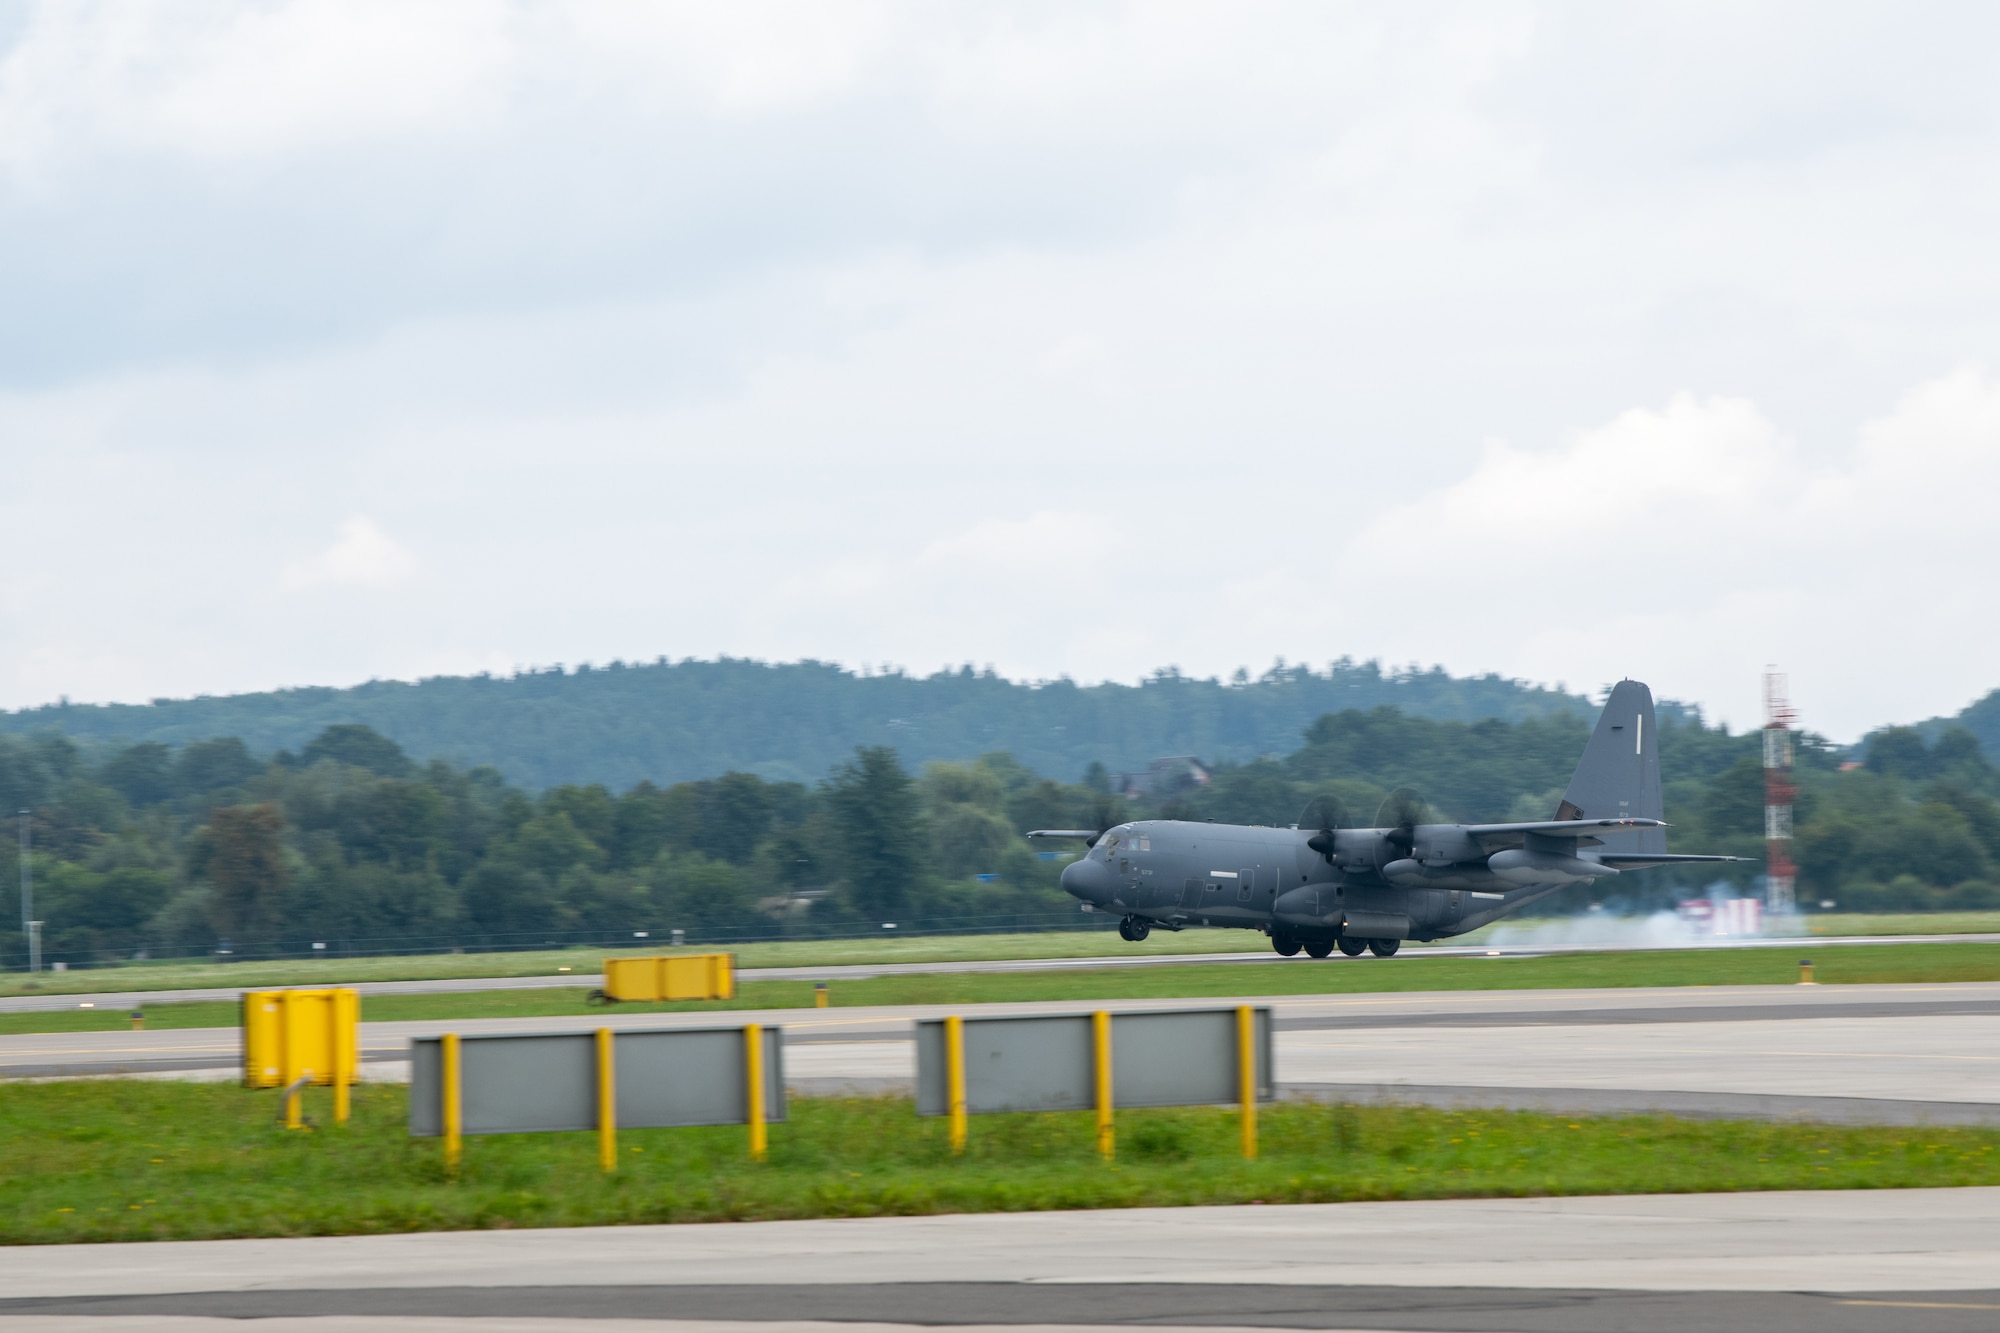 A MC-130J Commando II assigned to the 352d Special Operations Wing touches down in Krakow, Poland to take part in the European Partnership Flight event during the Building Partner Aviation Capacity Seminar in Krakow, Poland, Sept. 1, 2021.